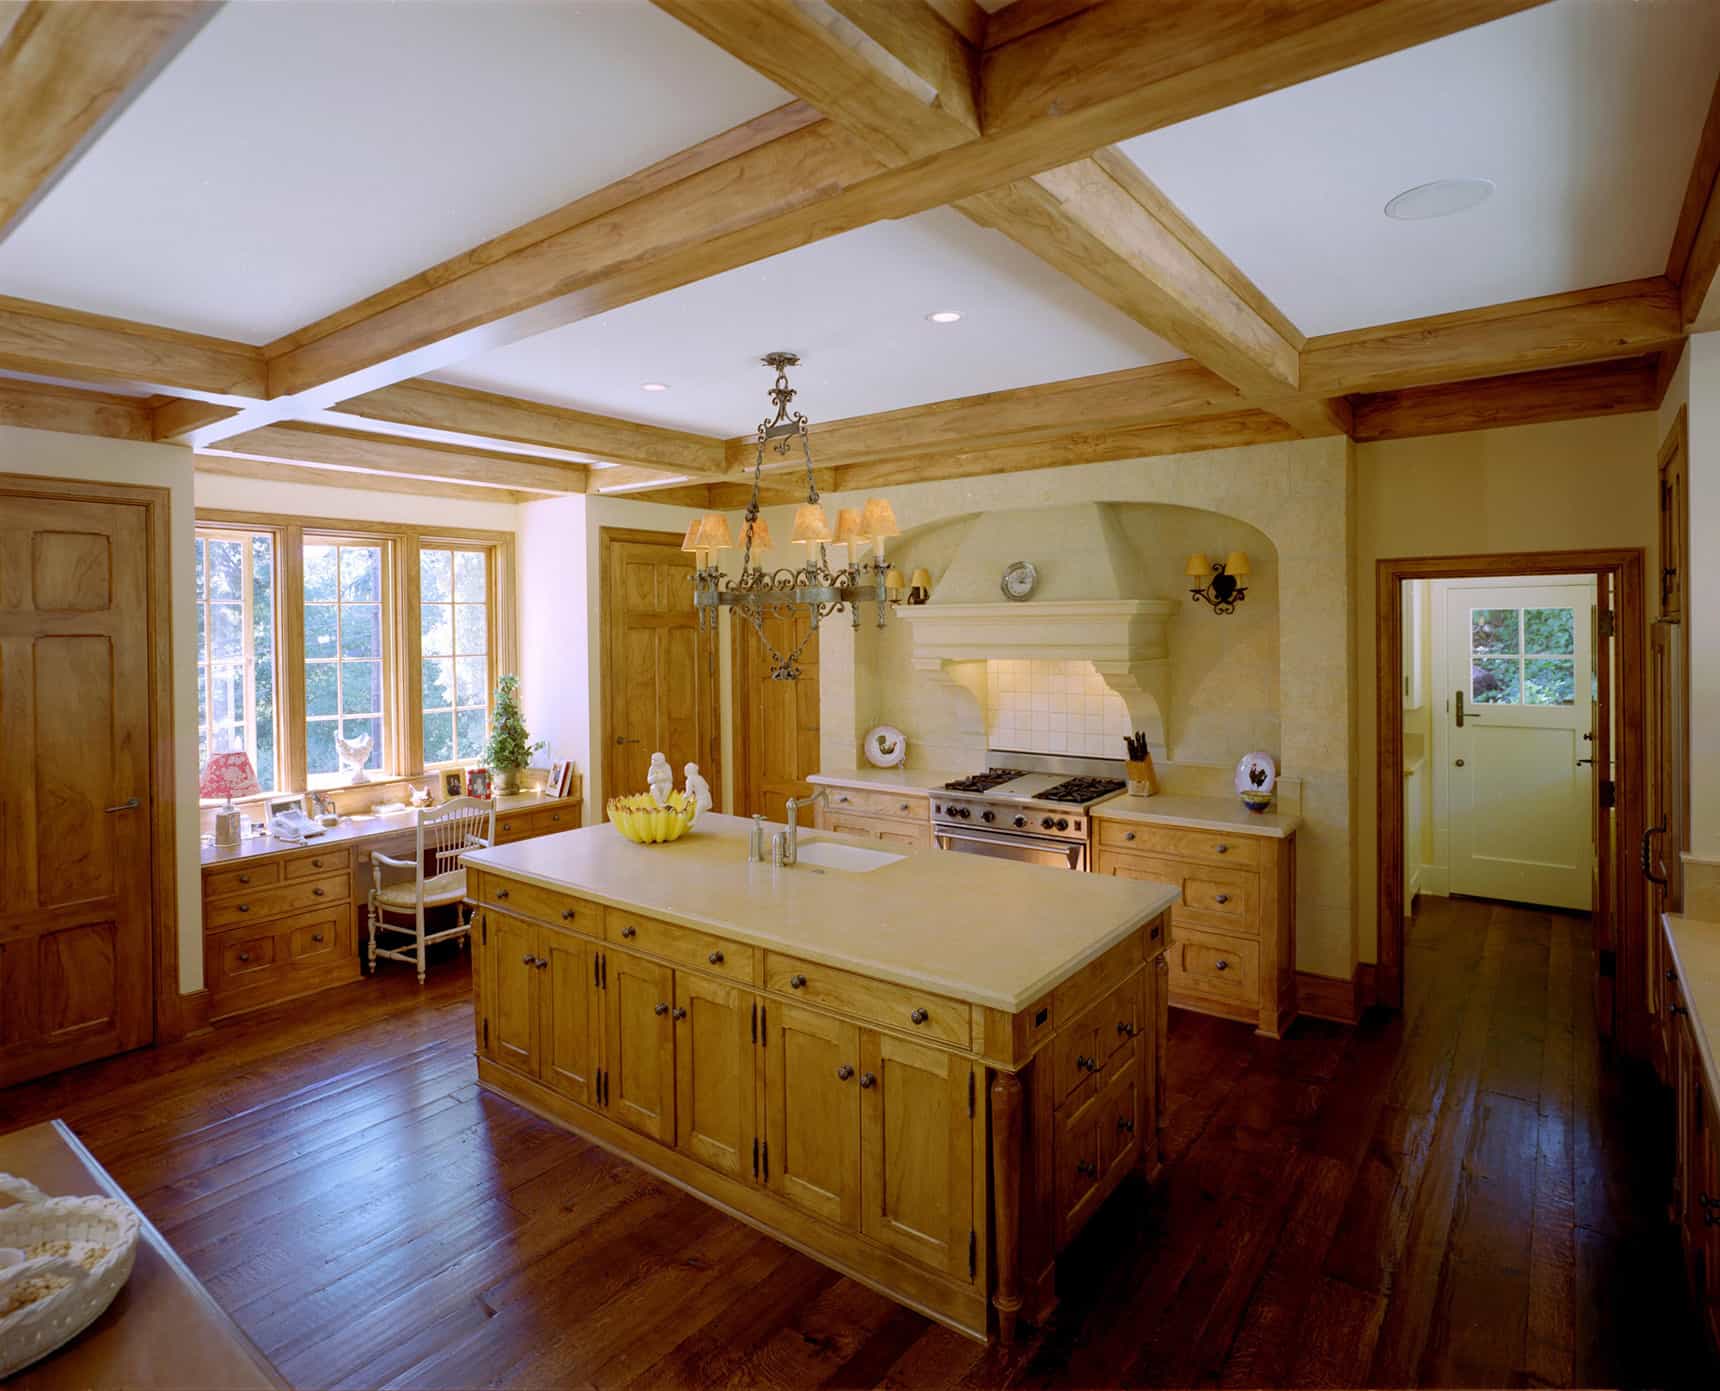 Historic kitchen renovation with exposed beams across the ceilings.